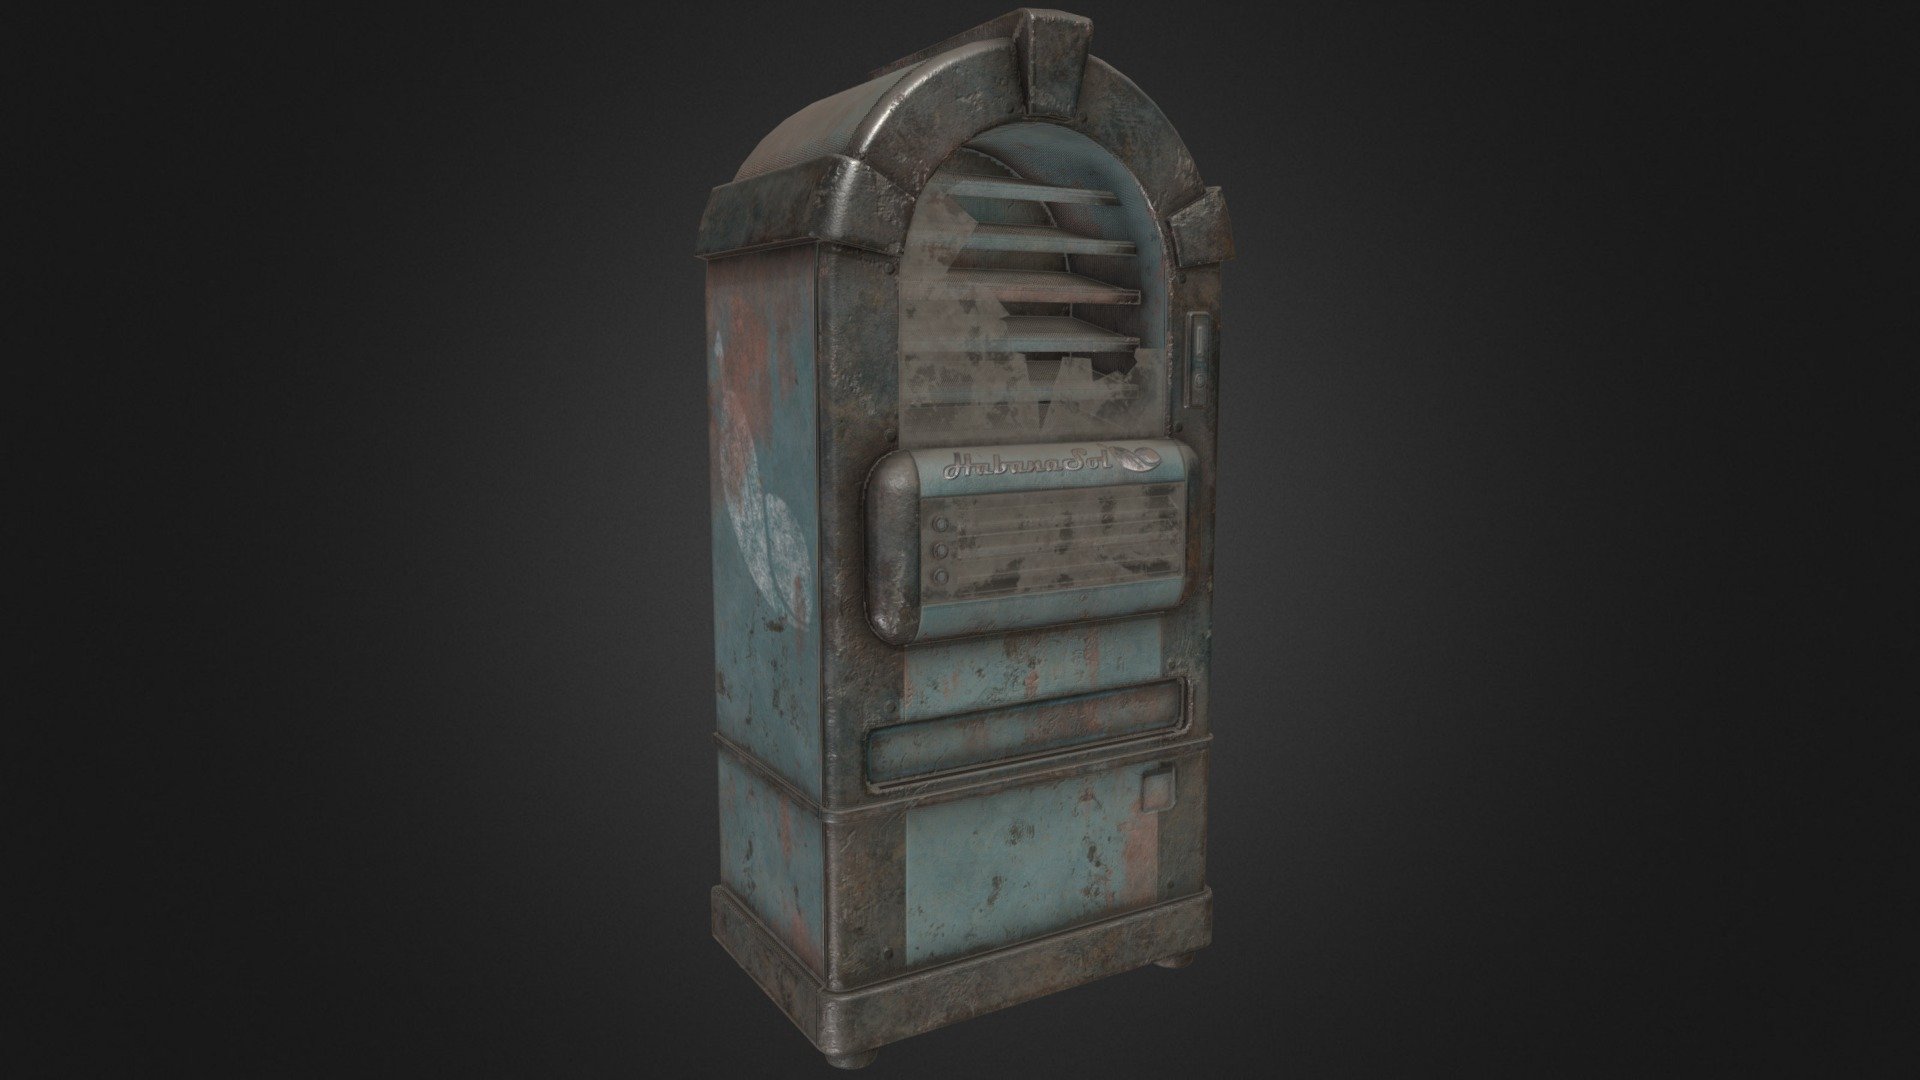 Fallout Miami Habana Sol Cigar Machine Asset modeled and textured by me for the upcoming mod by the Fallout Miami Development team. Based off the concept art made by Sfaire one of the teams concept artist, and presented in a scene created by one of the teams level designers StarCornet. 

Sfaira: https://sfaira.artstation.com
StarCornet https://flic.kr/ps/3g8kNW - Fallout Miami Cigar Machine Asset - 3D model by Nathaniel Wisdom (@nathanielwisdom) 3d model